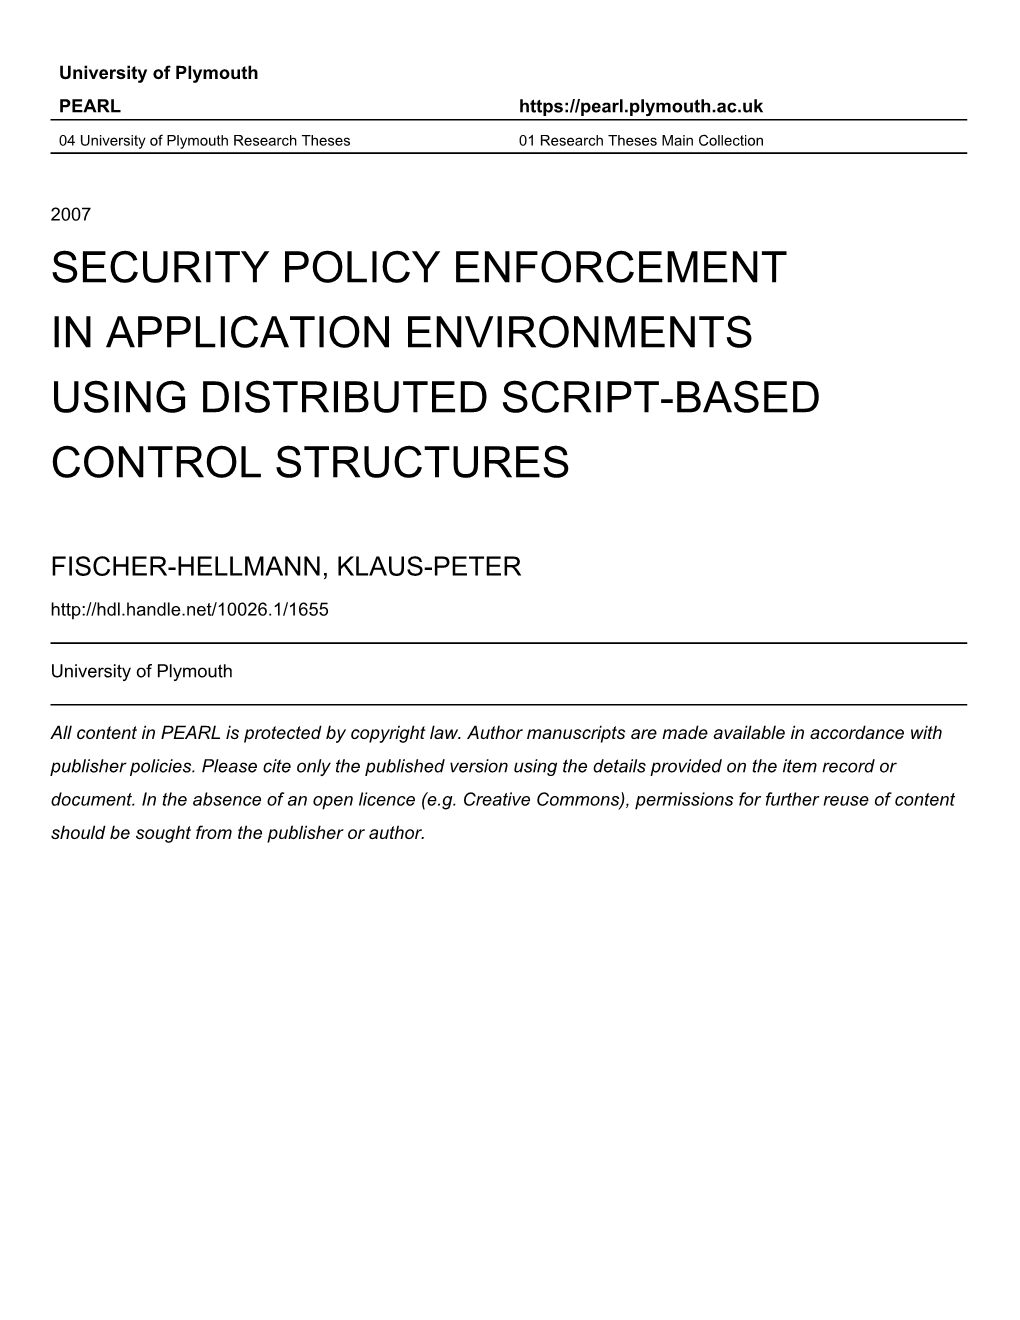 Security Policy Enforcement in Application Environments Using Distributed Script-Based Control Structures